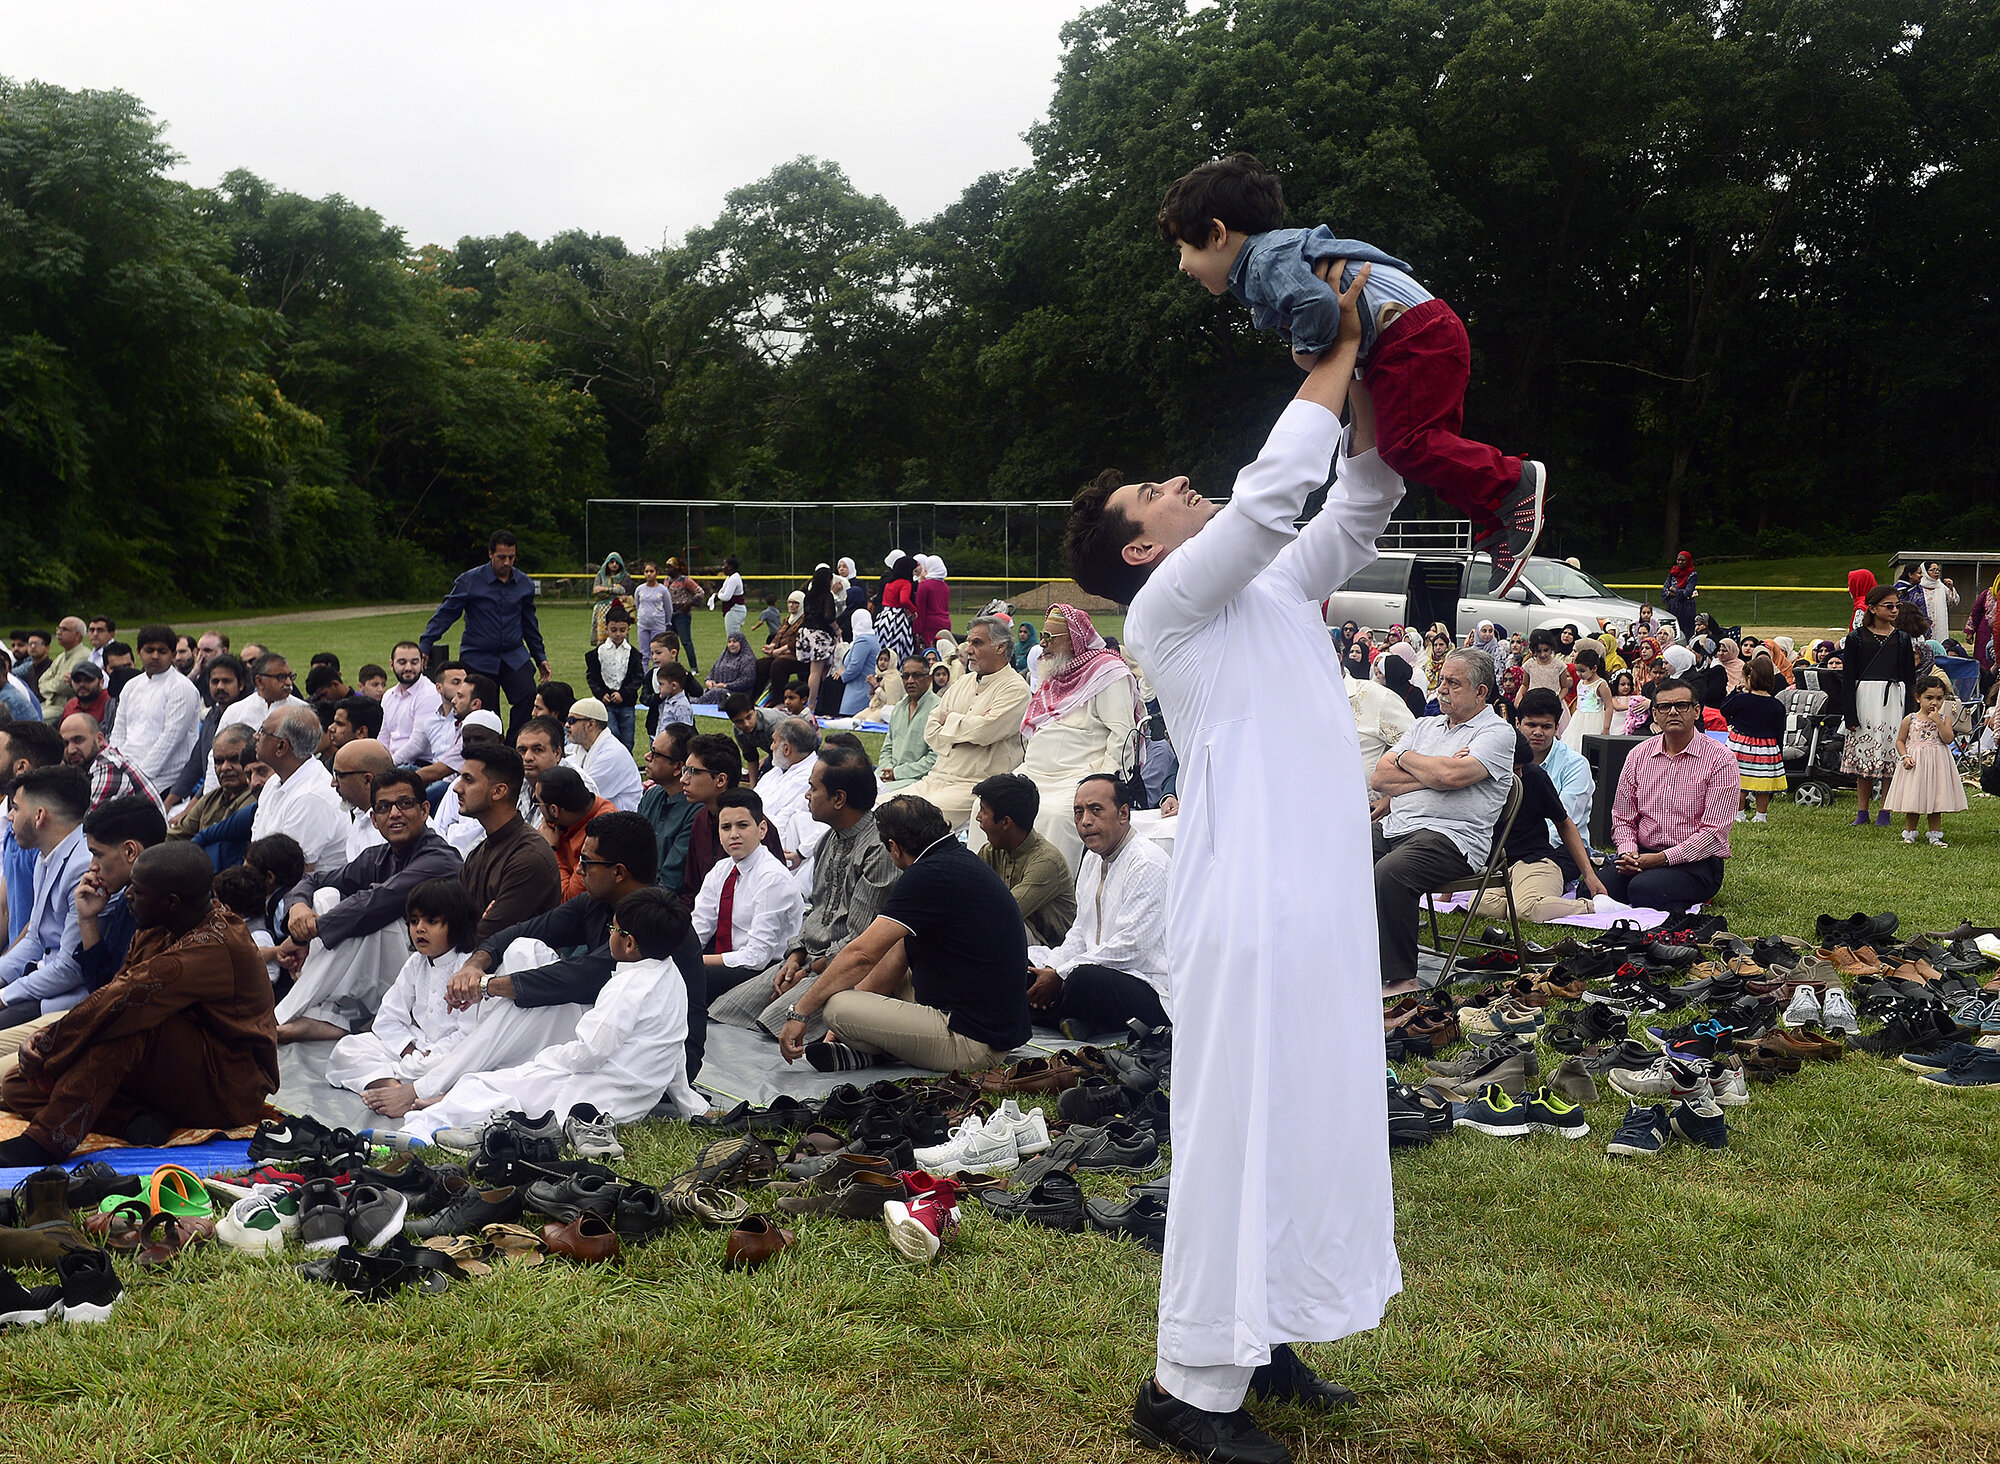  Adam Aboudawd celebrates with his cousin Eyad Alawi, 2, as members of the Islamic Center of New London gather for a prayer to celebrate Eid al-Adha on Tuesday, August 21, 2018 at Washington Park in Groton. The holiday, also referred to as the Festiv